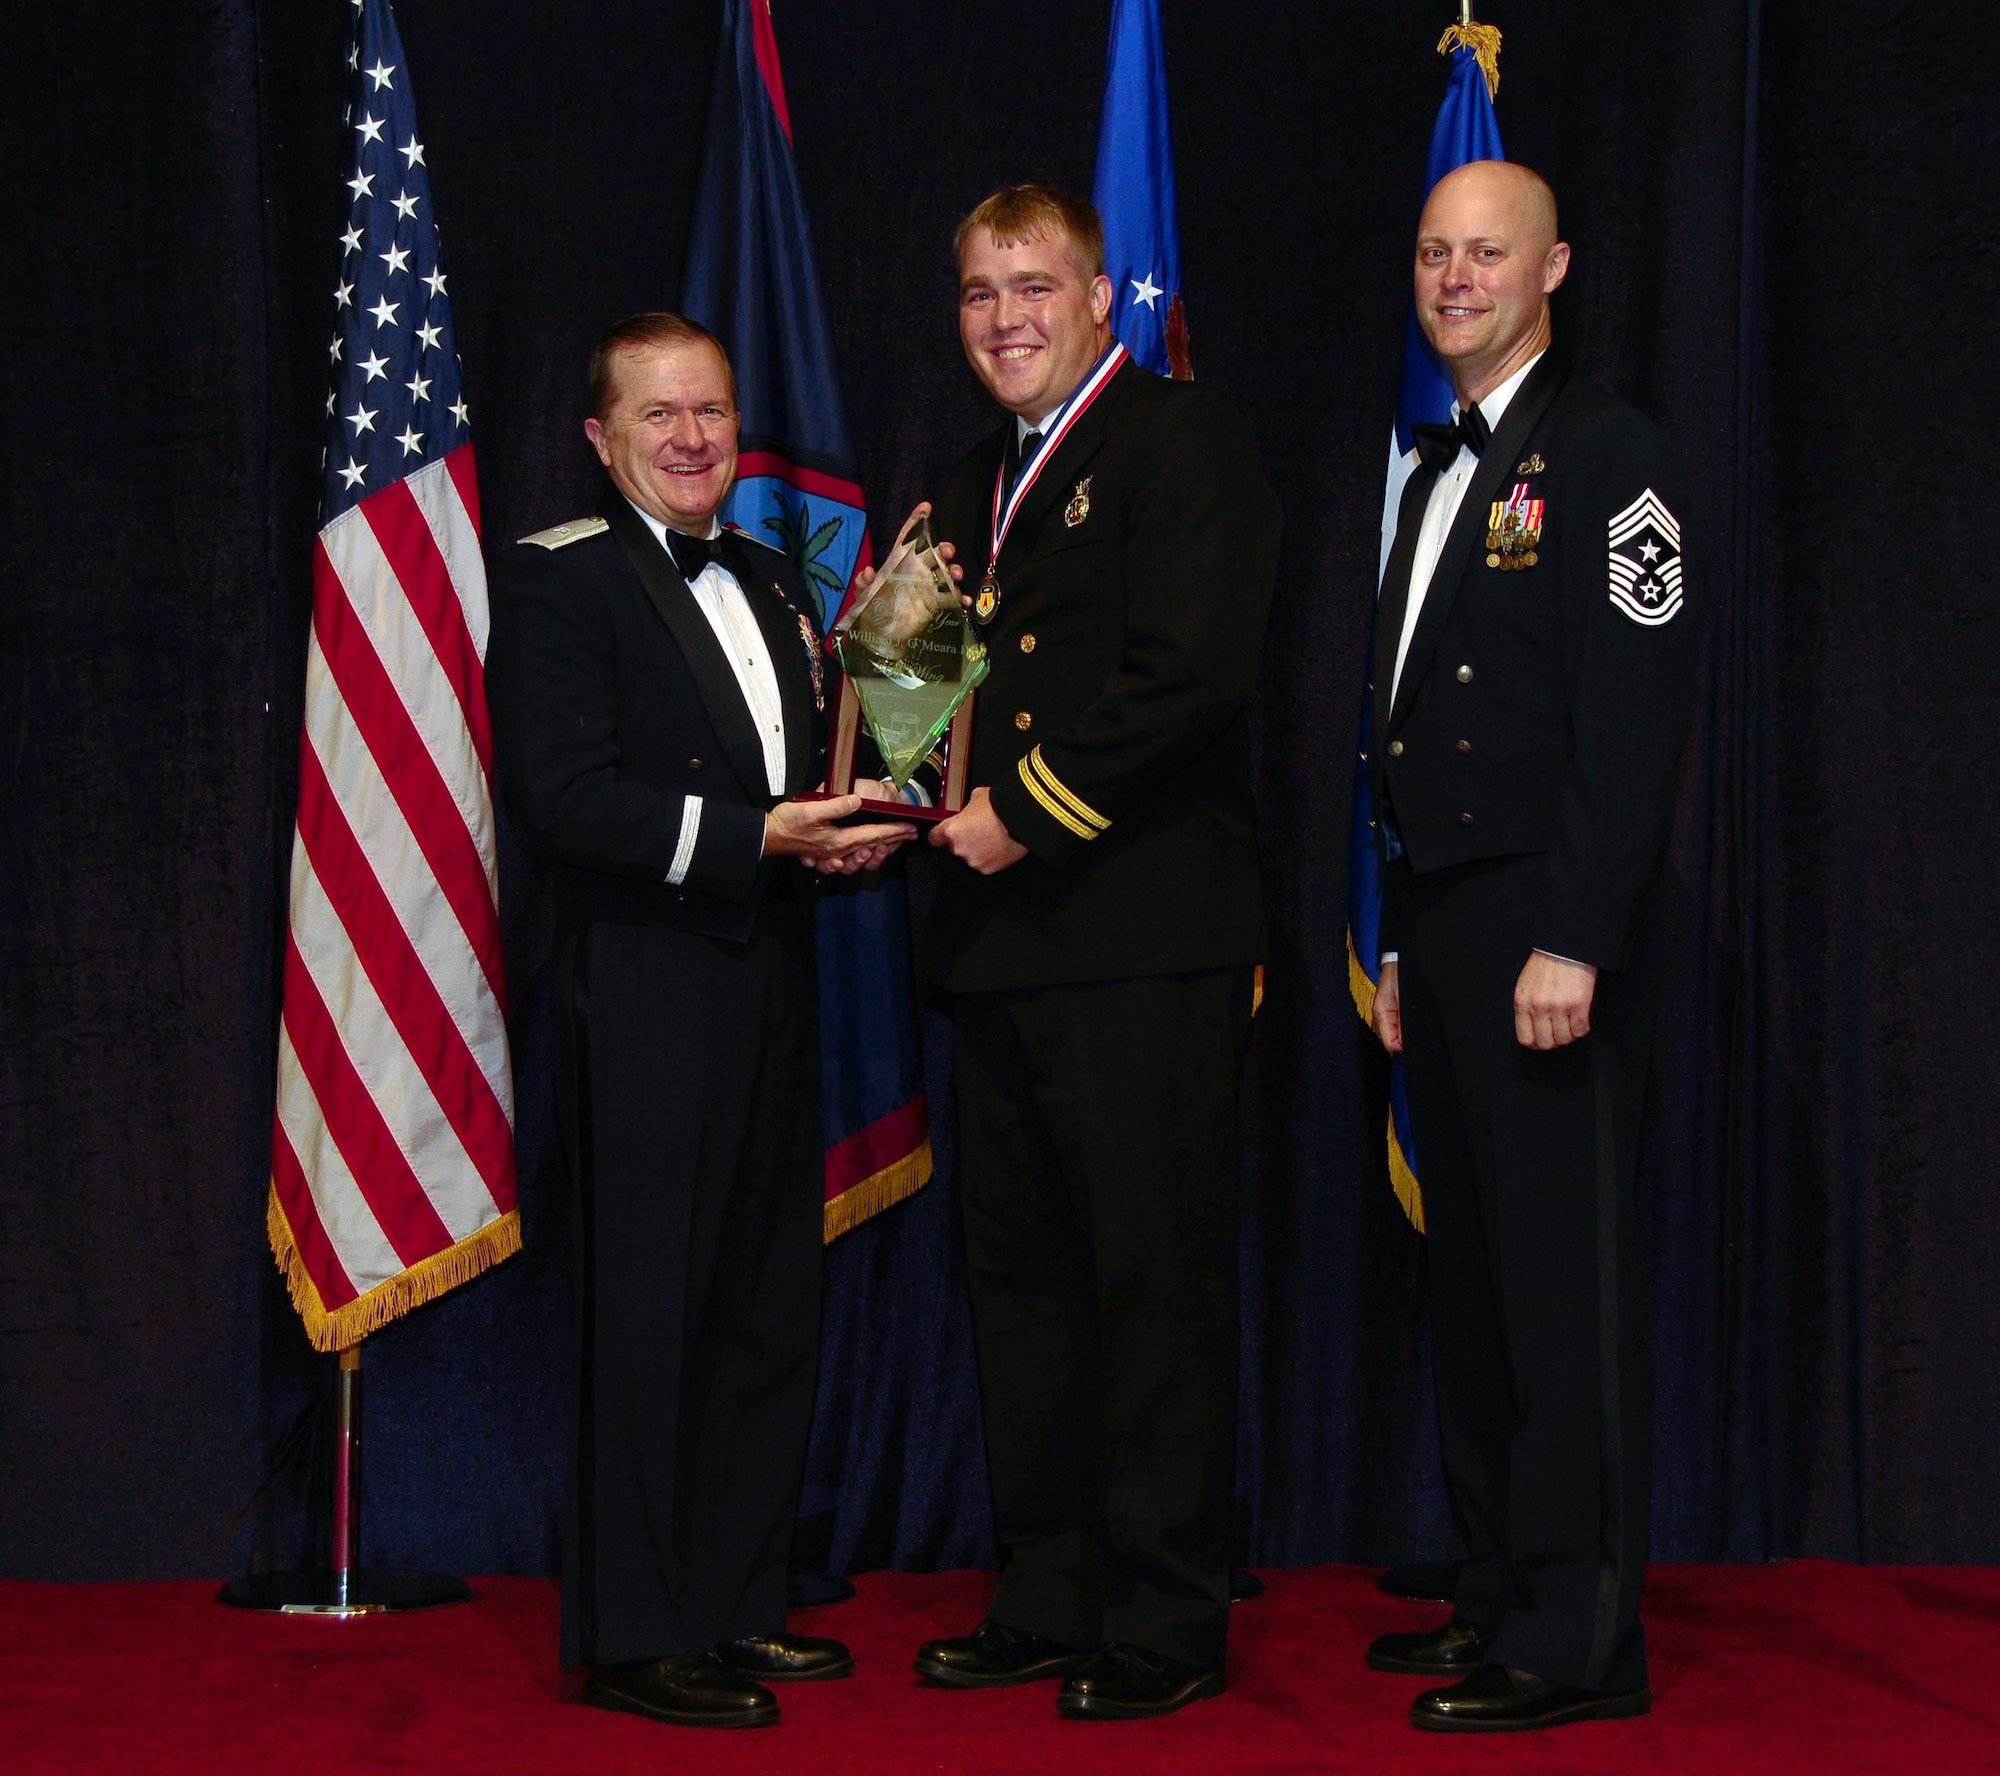 ANDERSEN AIR FORCE BASE, Guam - Civilian of the Year (Category 2) winner William O'Meara Jr; 36th Mission Support Group, is congratulated by Brig. Gen. Phil Ruhlman, Commander, 36th Wing, and Command Chief Master Sgt. Allen Mullinex during the Feb. 19 Annual Award ceremony.( U.S. Air Force photo by Airman 1st Class Jeffrey Schultze)